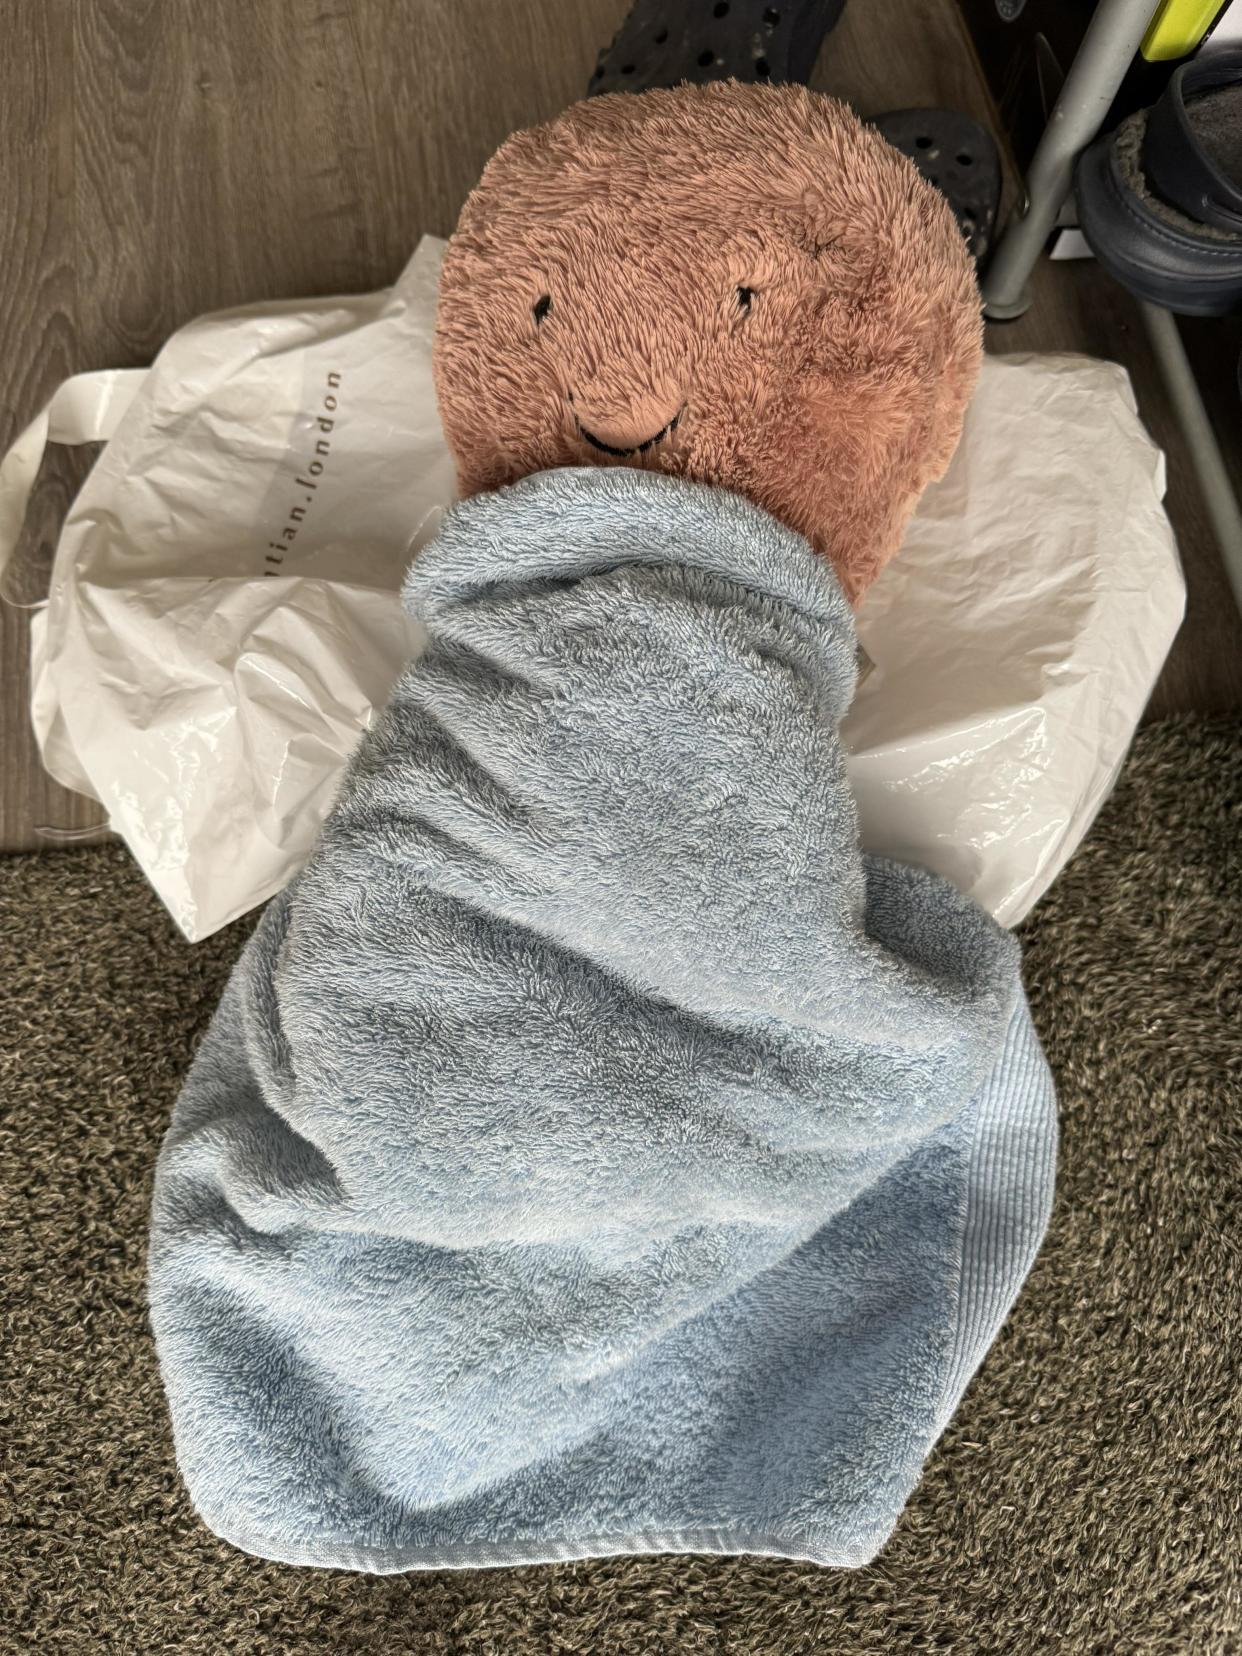 Octopus wrapped in towel